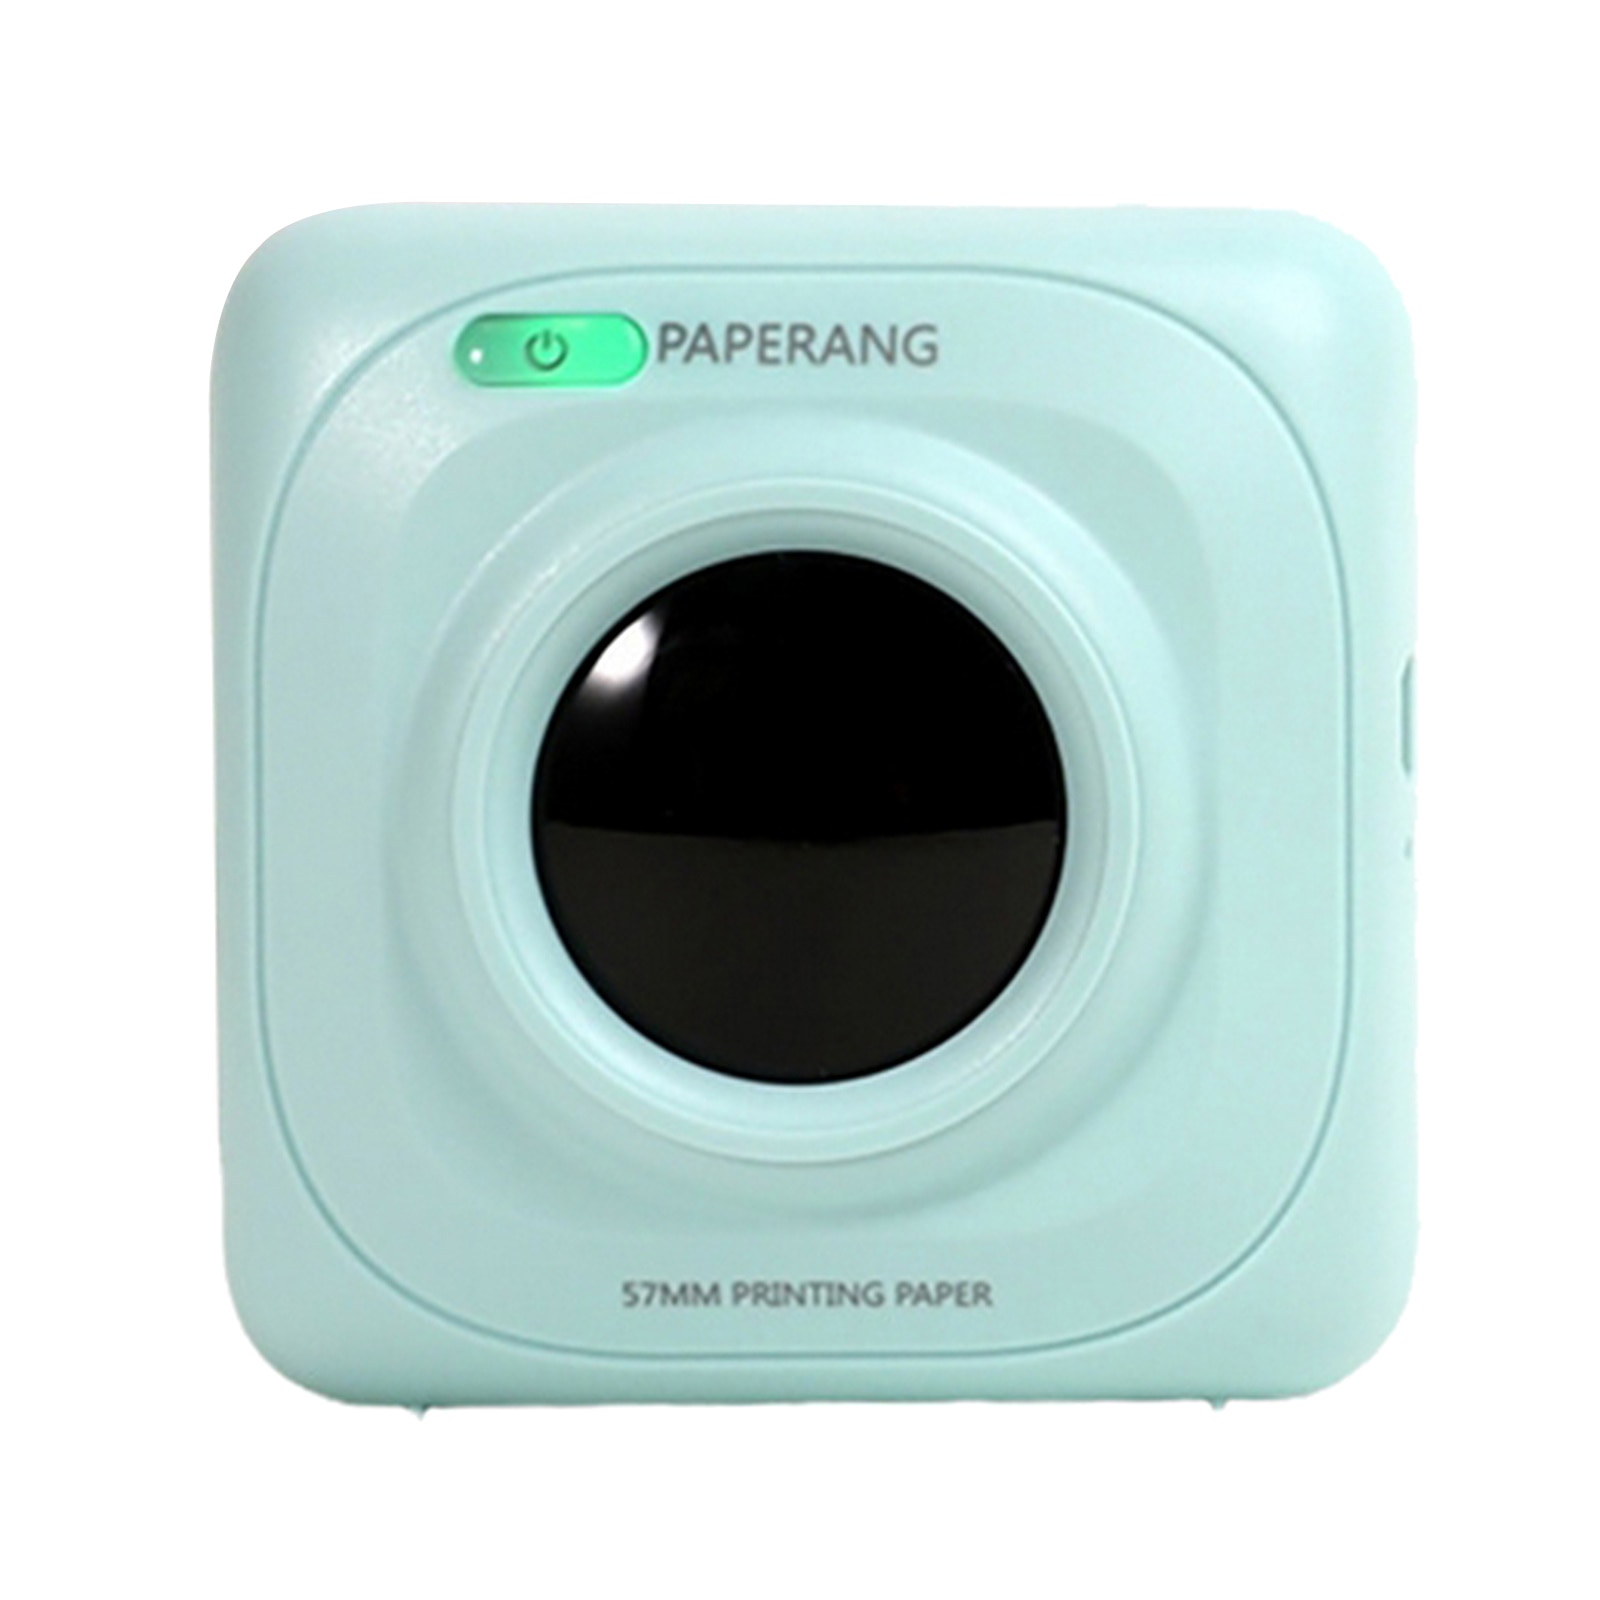 PAPERANG Portable Thermal Printer Photo Picture HD Thermal Label Printer for iOS Android Wireless Connection Bluetooth Printer